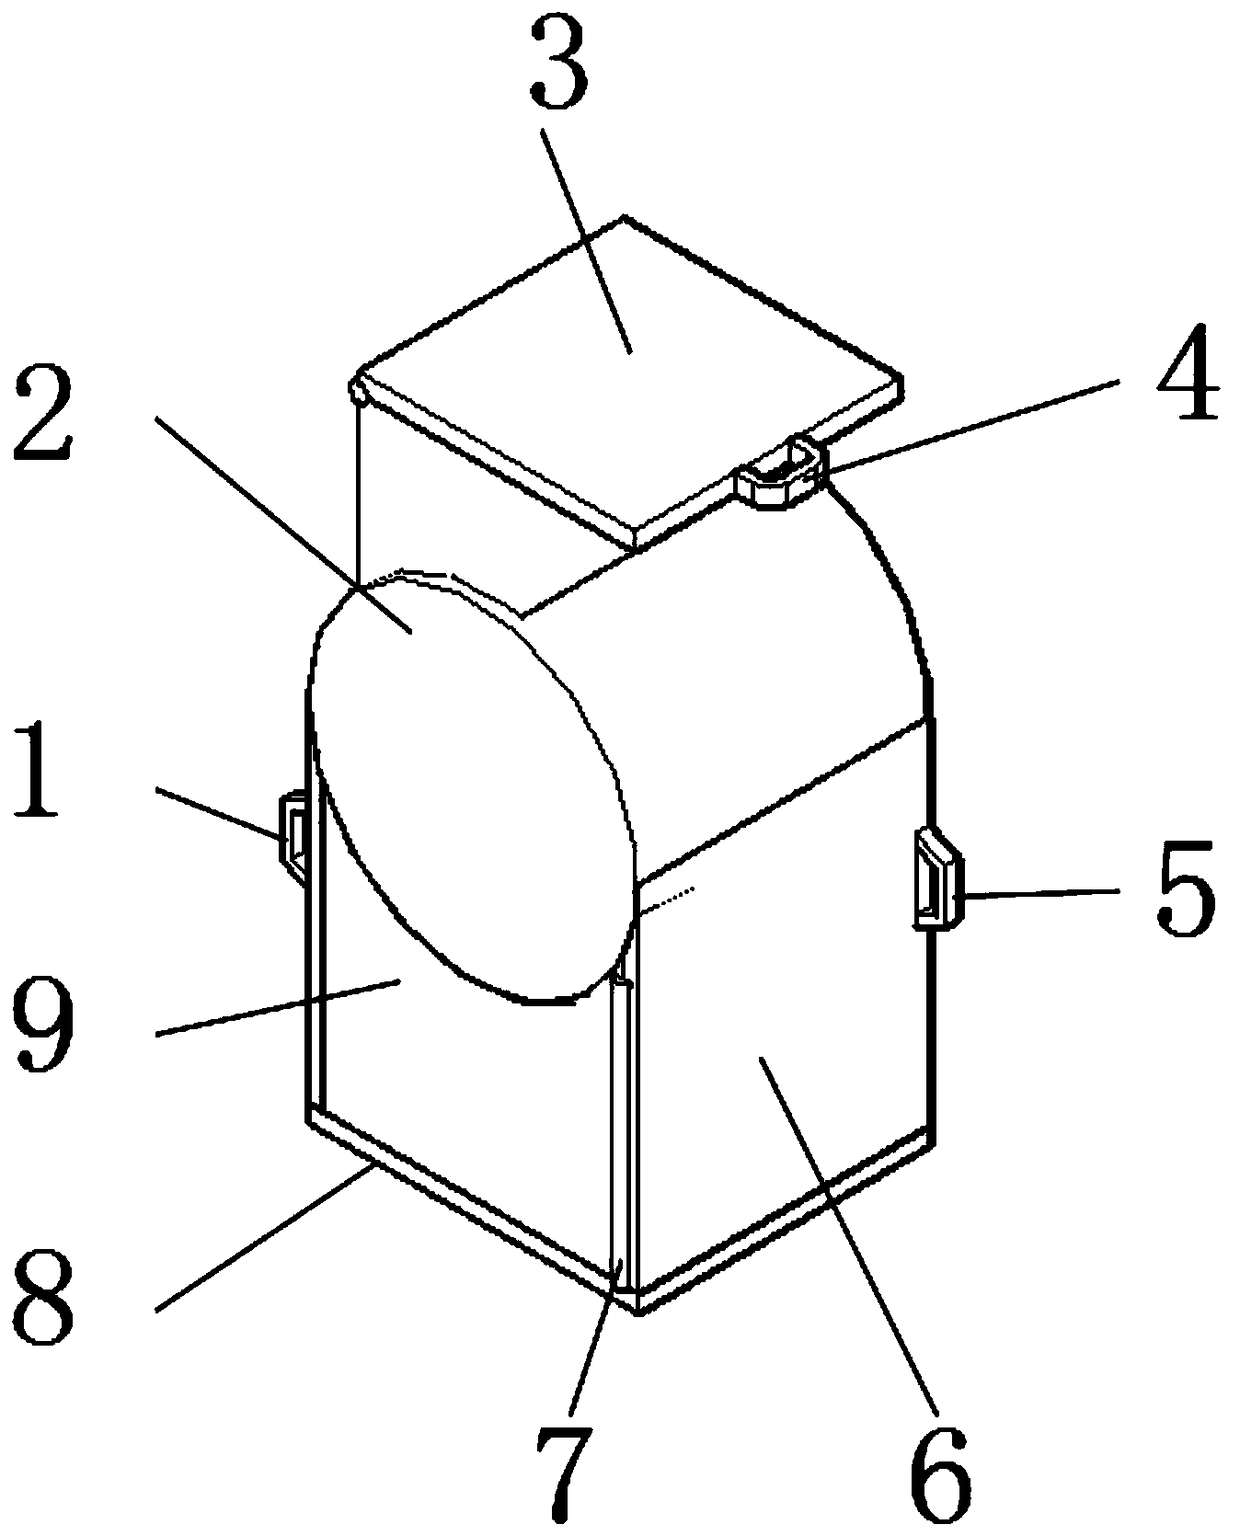 Environment-friendly density classification garbage can